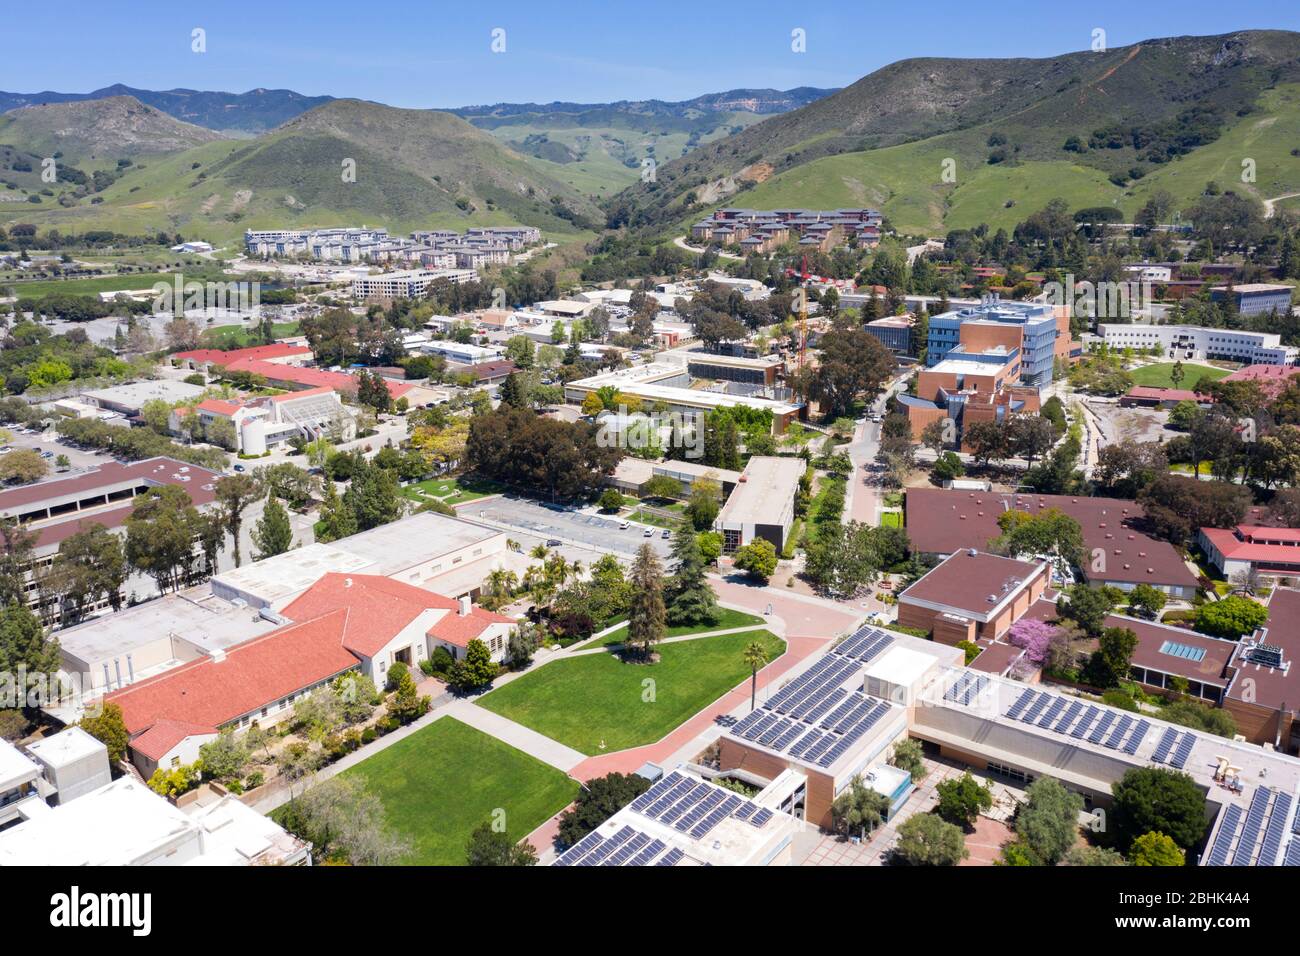 Aerial view above the campus of Cal Poly San Luis Obispo, California